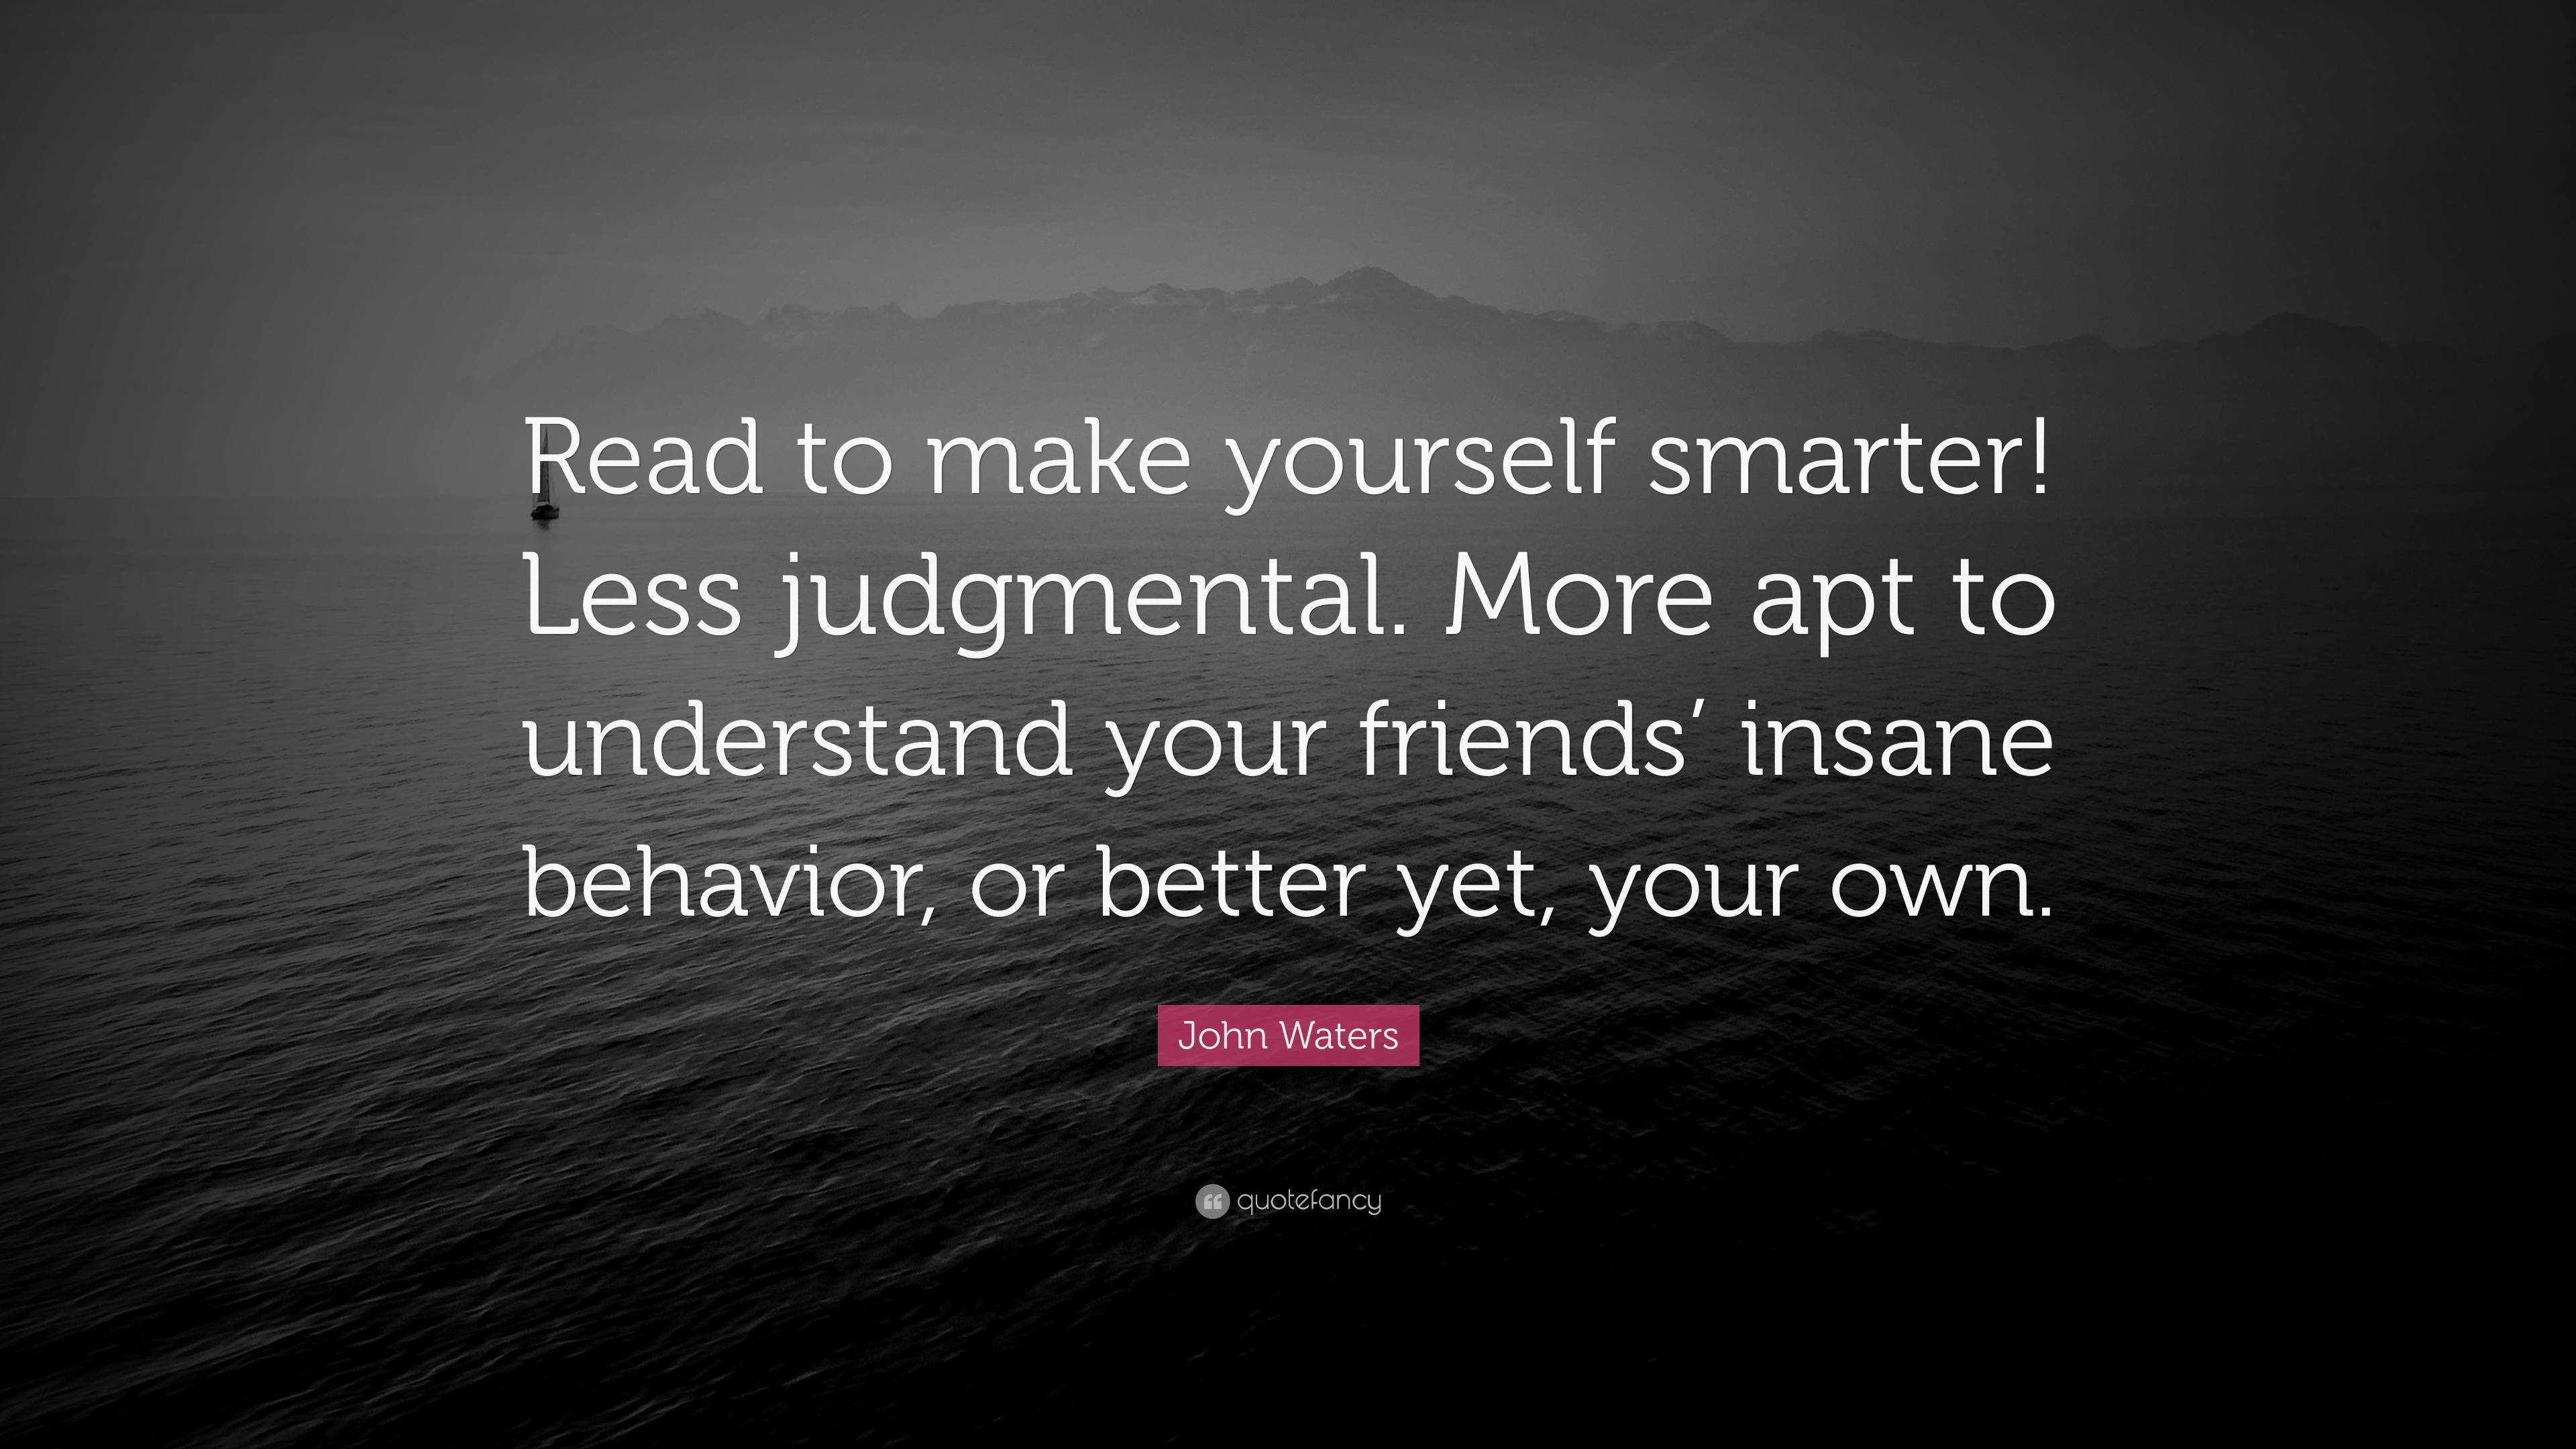 John Waters Quote: “Read to make yourself smarter! Less judgmental ...